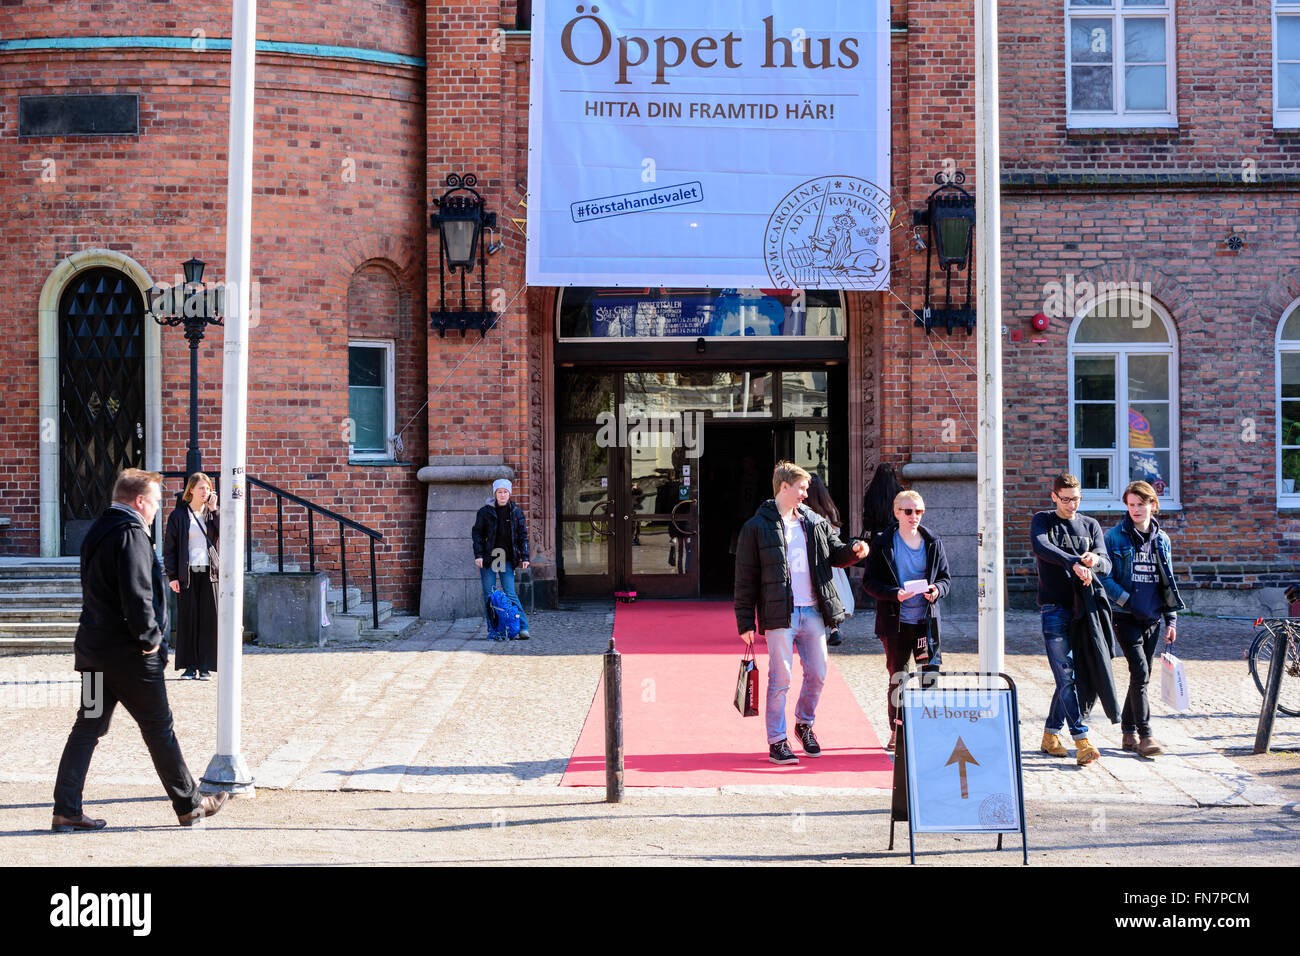 Lund, Sweden - March 12, 2016: The university has an open house to attract new students. Here is the entrance to the Af-borgen w Stock Photo